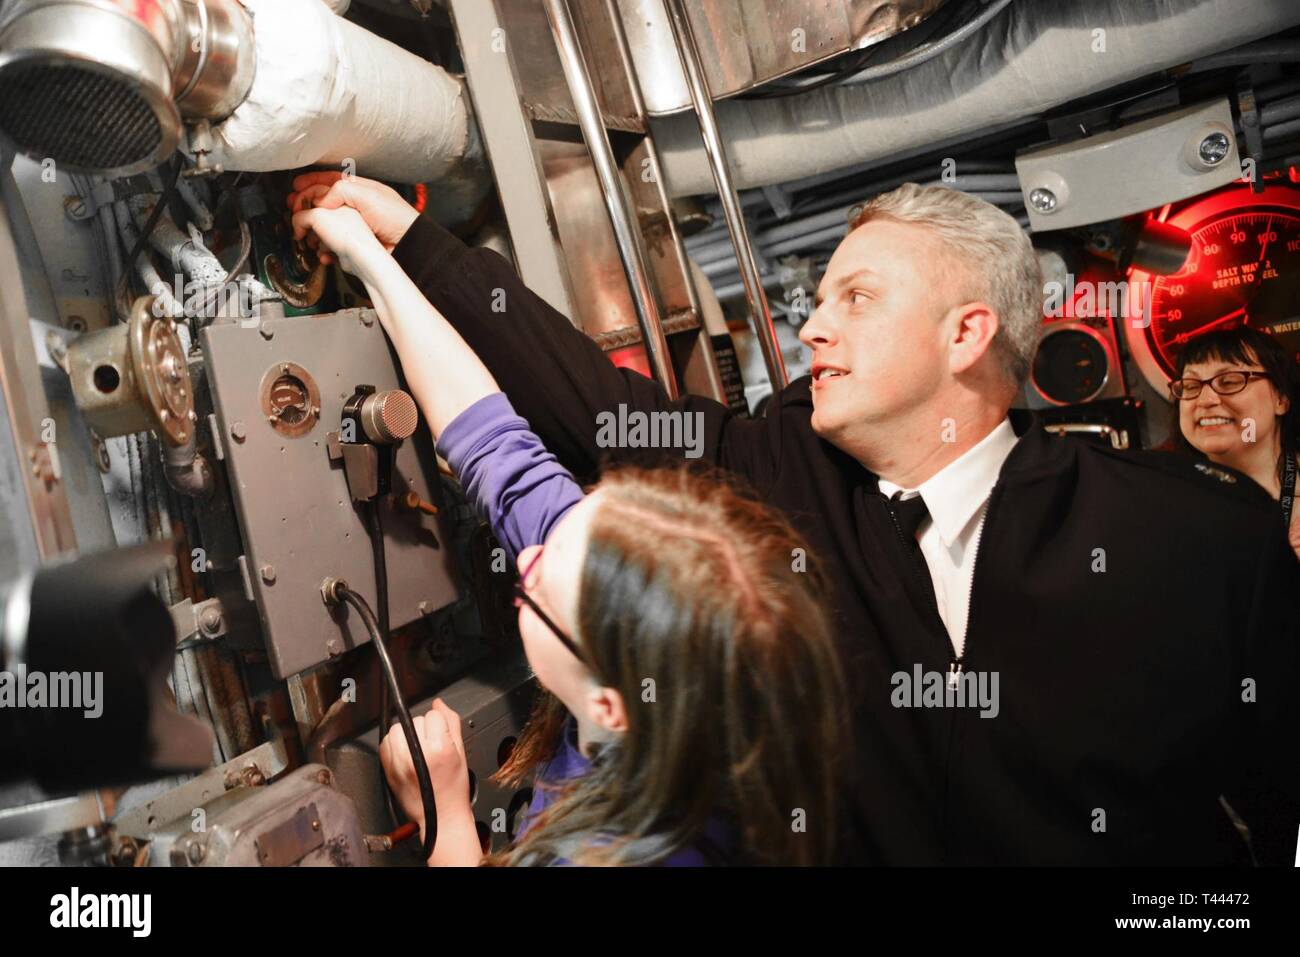 PITTSBURGH, Pa. (Mar. 14, 2019) Senior Chief Dave Jackson, from Denver, Colorado, and his daughter show visitors onboard the USS Requin (SS 481) how to use the dive alarm. Jackson is stationed on the nuclear-powered Los Angeles-class, fast-attack submarine USS Pittsburgh (SSN 720) and visited the Requin at the Carnegie Science Center with other crewmembers. Pittsburgh crewmembers are participating in various events around Pittsburgh to bring awareness to the U.S. Navy's mission. The Navy's fast-attack submarines are designed to seek and destroy enemy submarines and surface ships; deliver missi Stock Photo